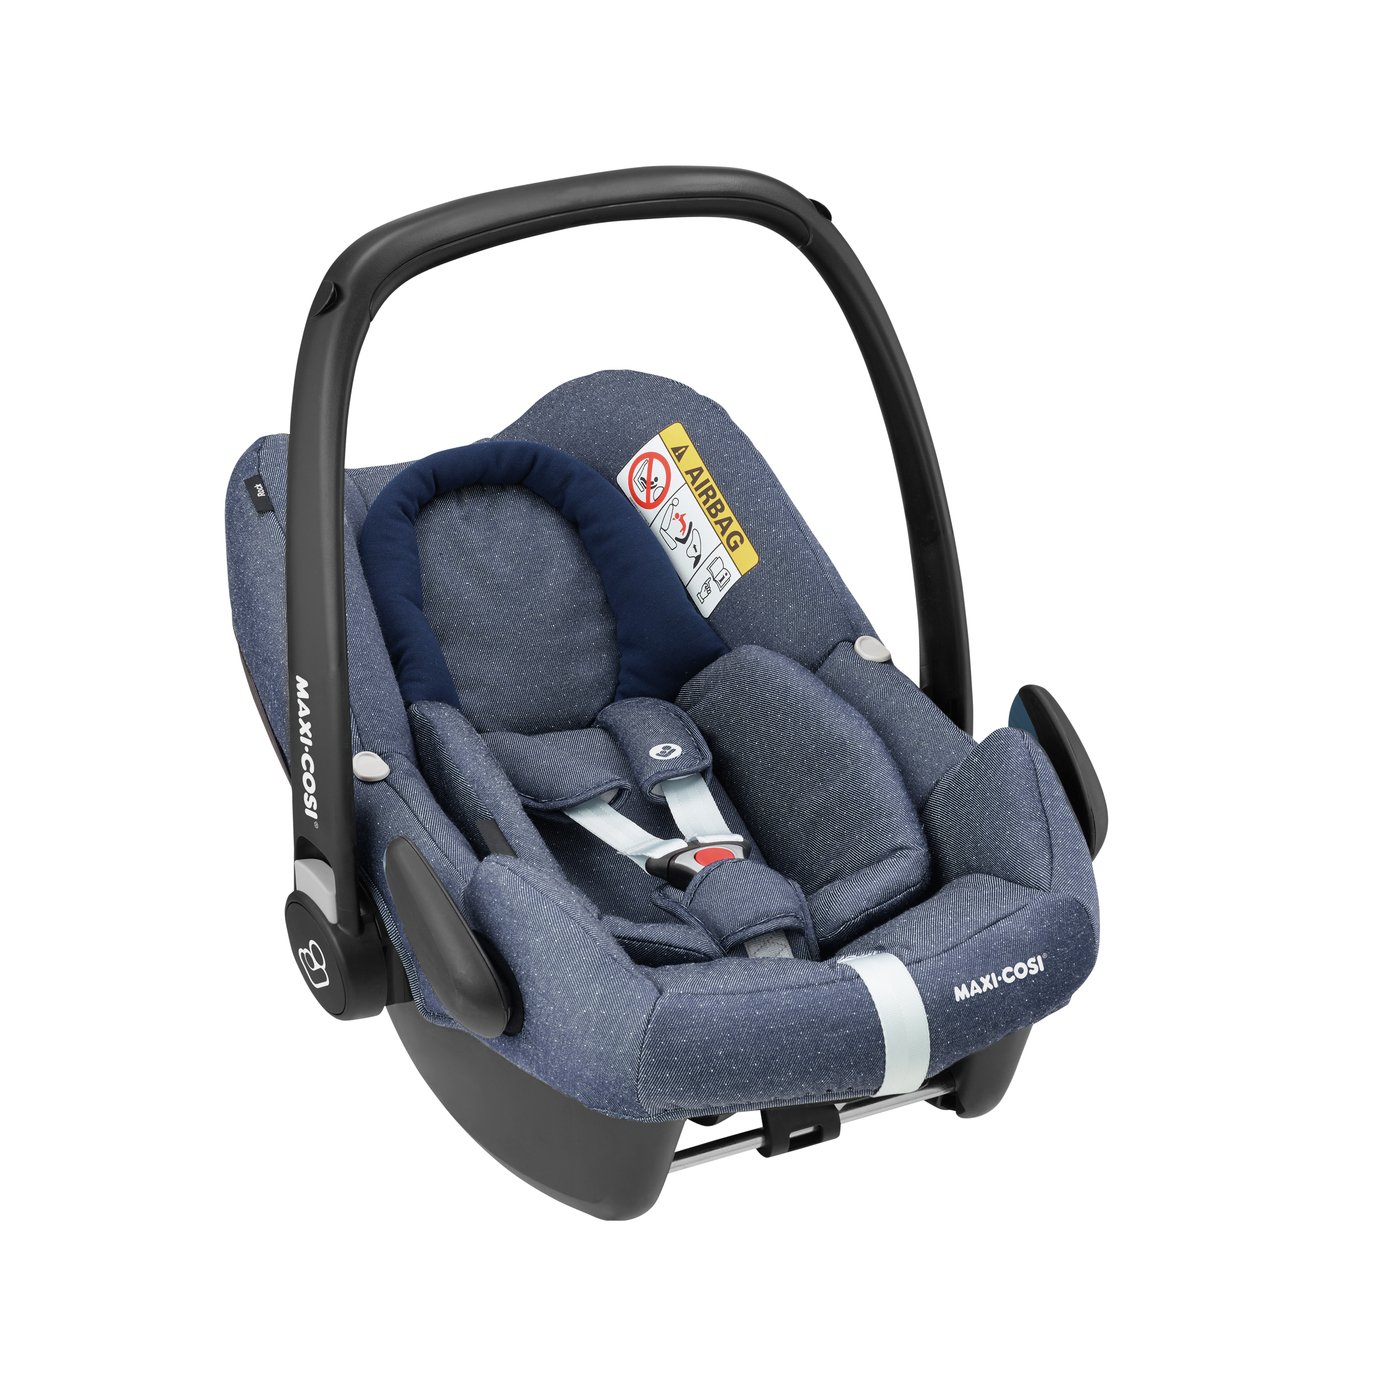 Maxi-Cosi Rock Group 0+ i-Size baby Car Seat -Sparkling Blue